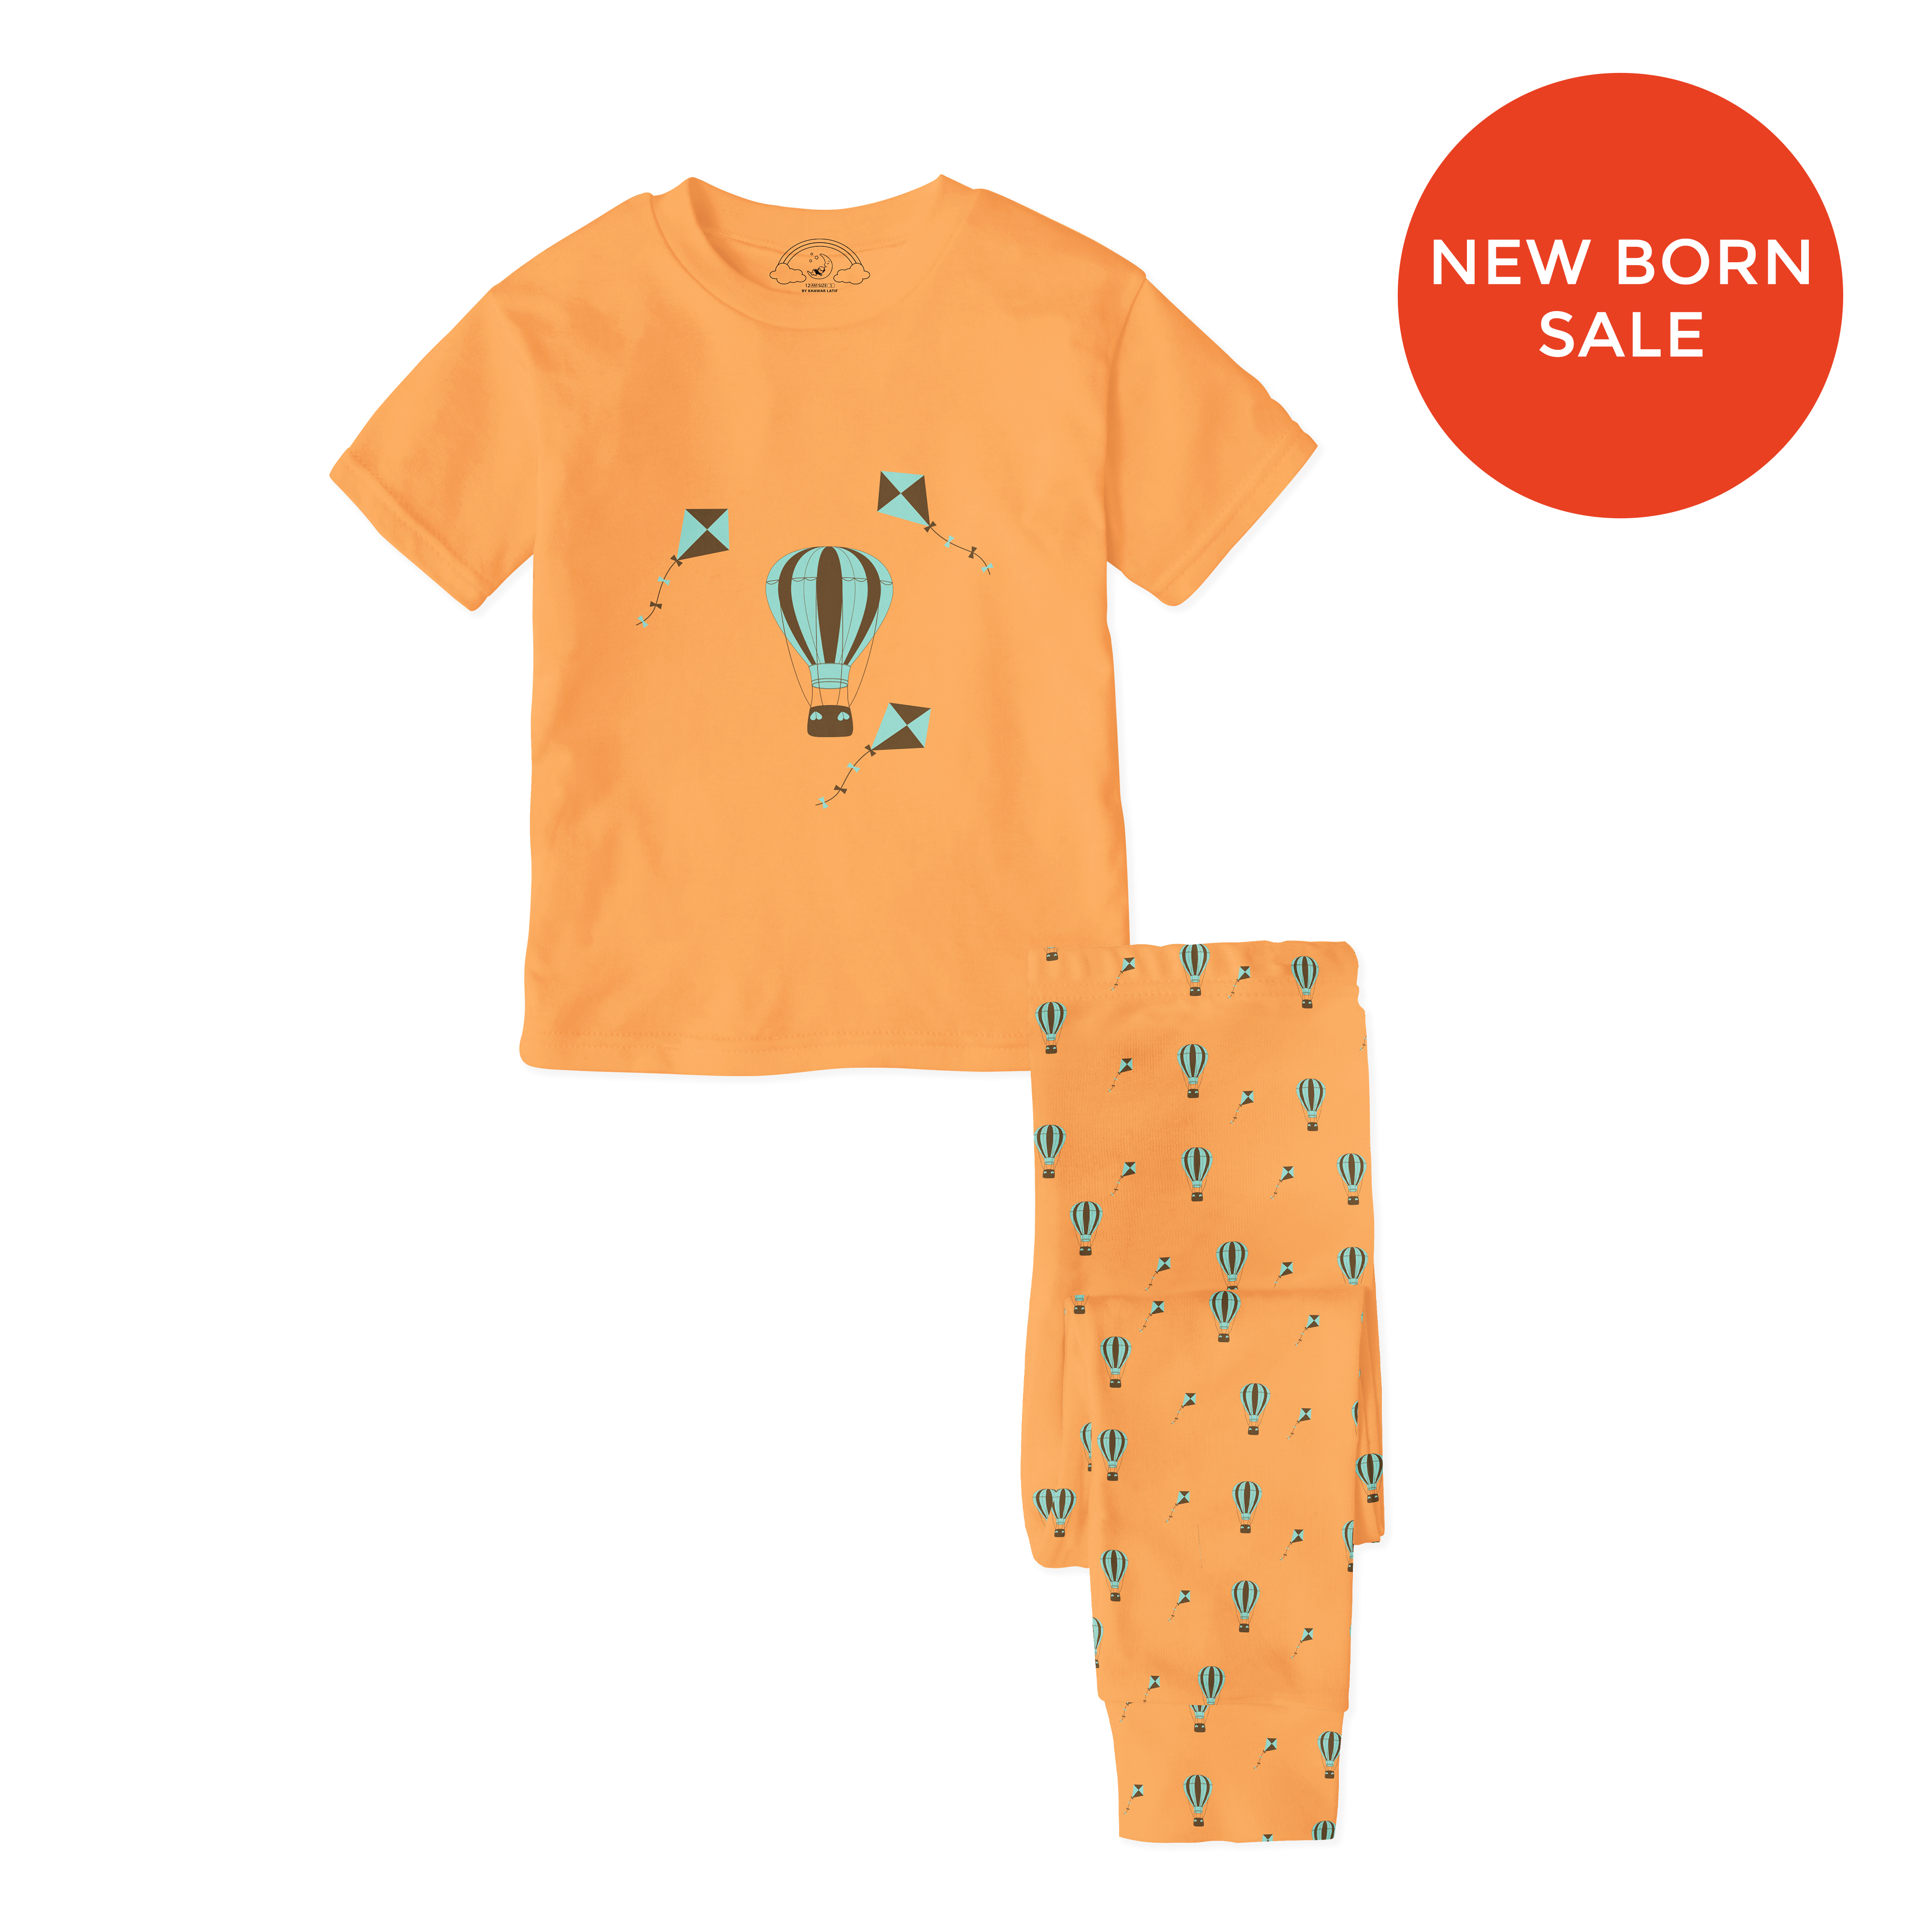 Pyjamas for 0-3 Months - Exclusive Sale for New Borns